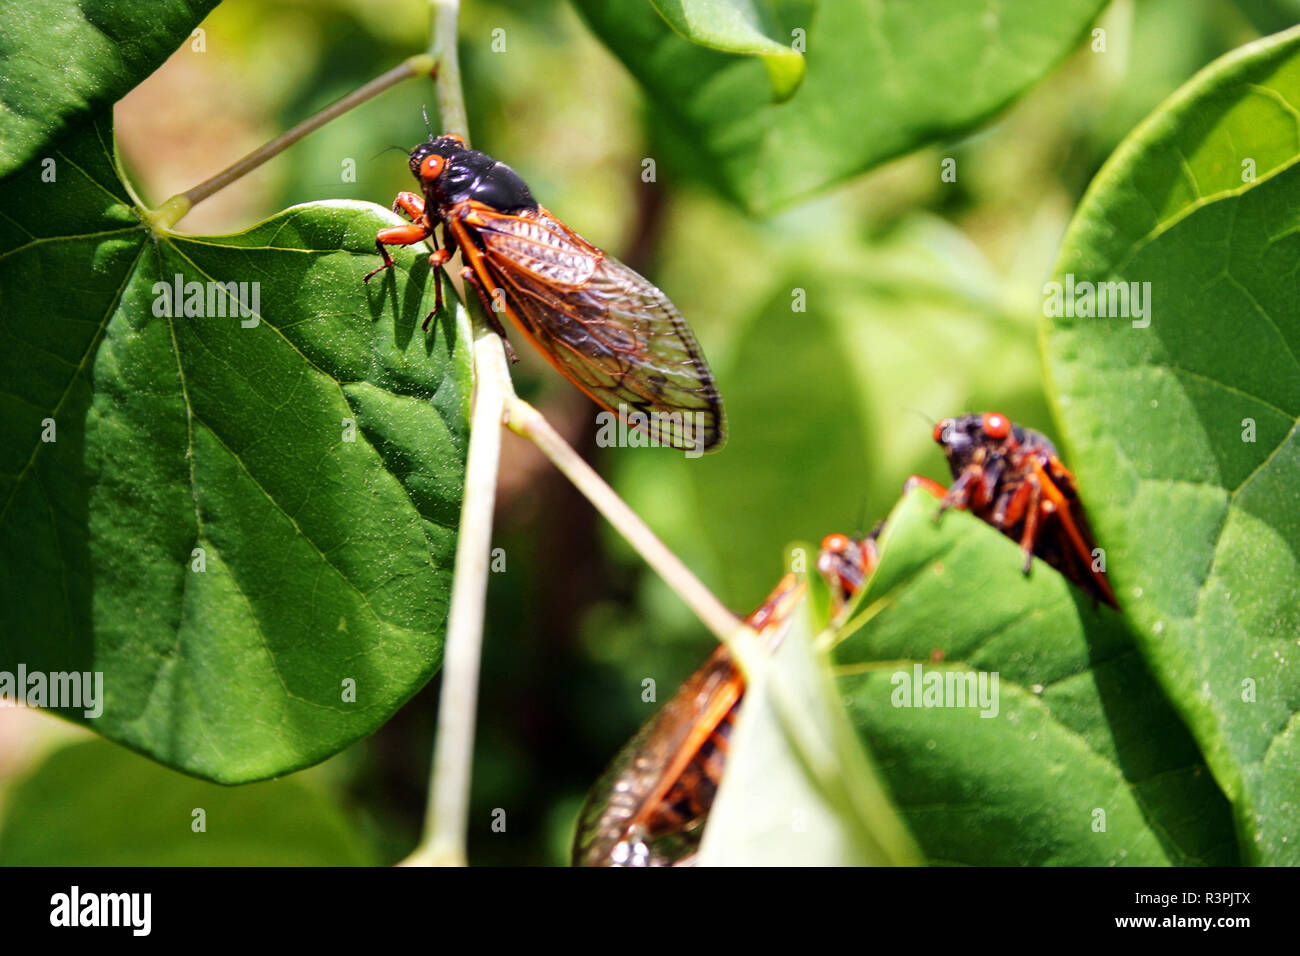 Close up of a vividly colored adult cicadas with a 17 year life cycle and intricate, transparent wings hanging out in a forest of leaves Stock Photo